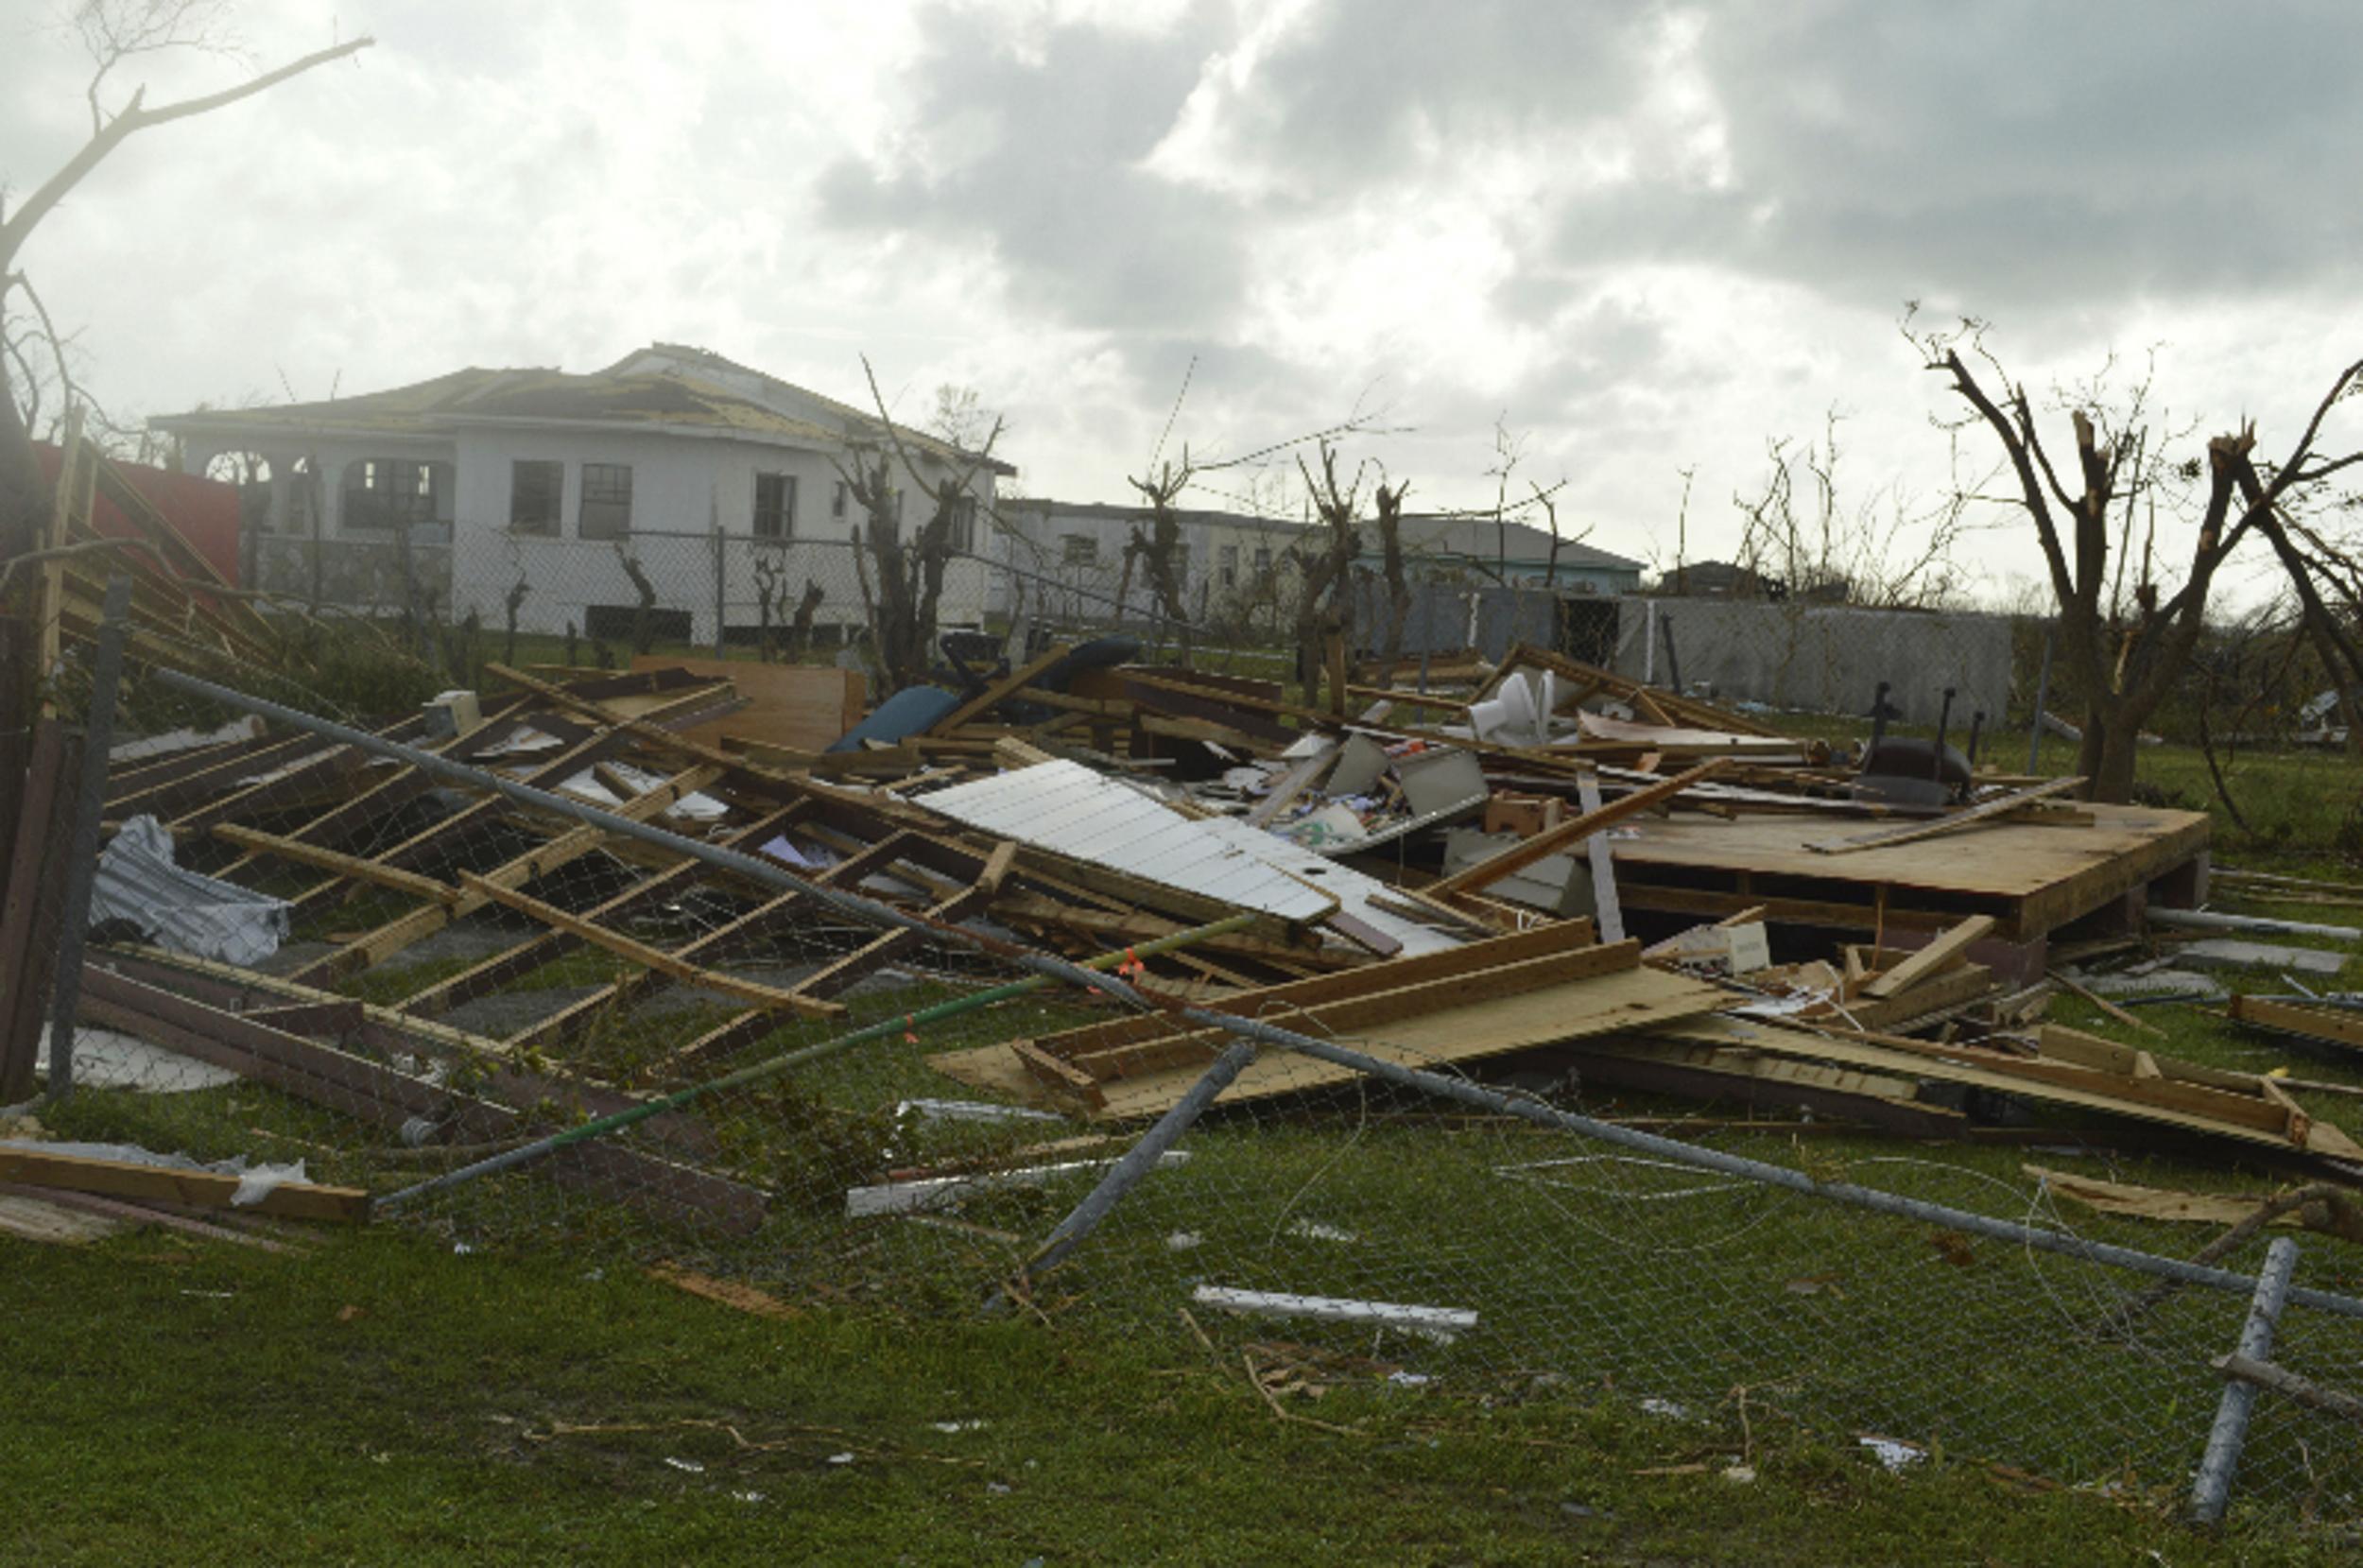 Large parts of the Turks and Caicos Islands have already been destroyed